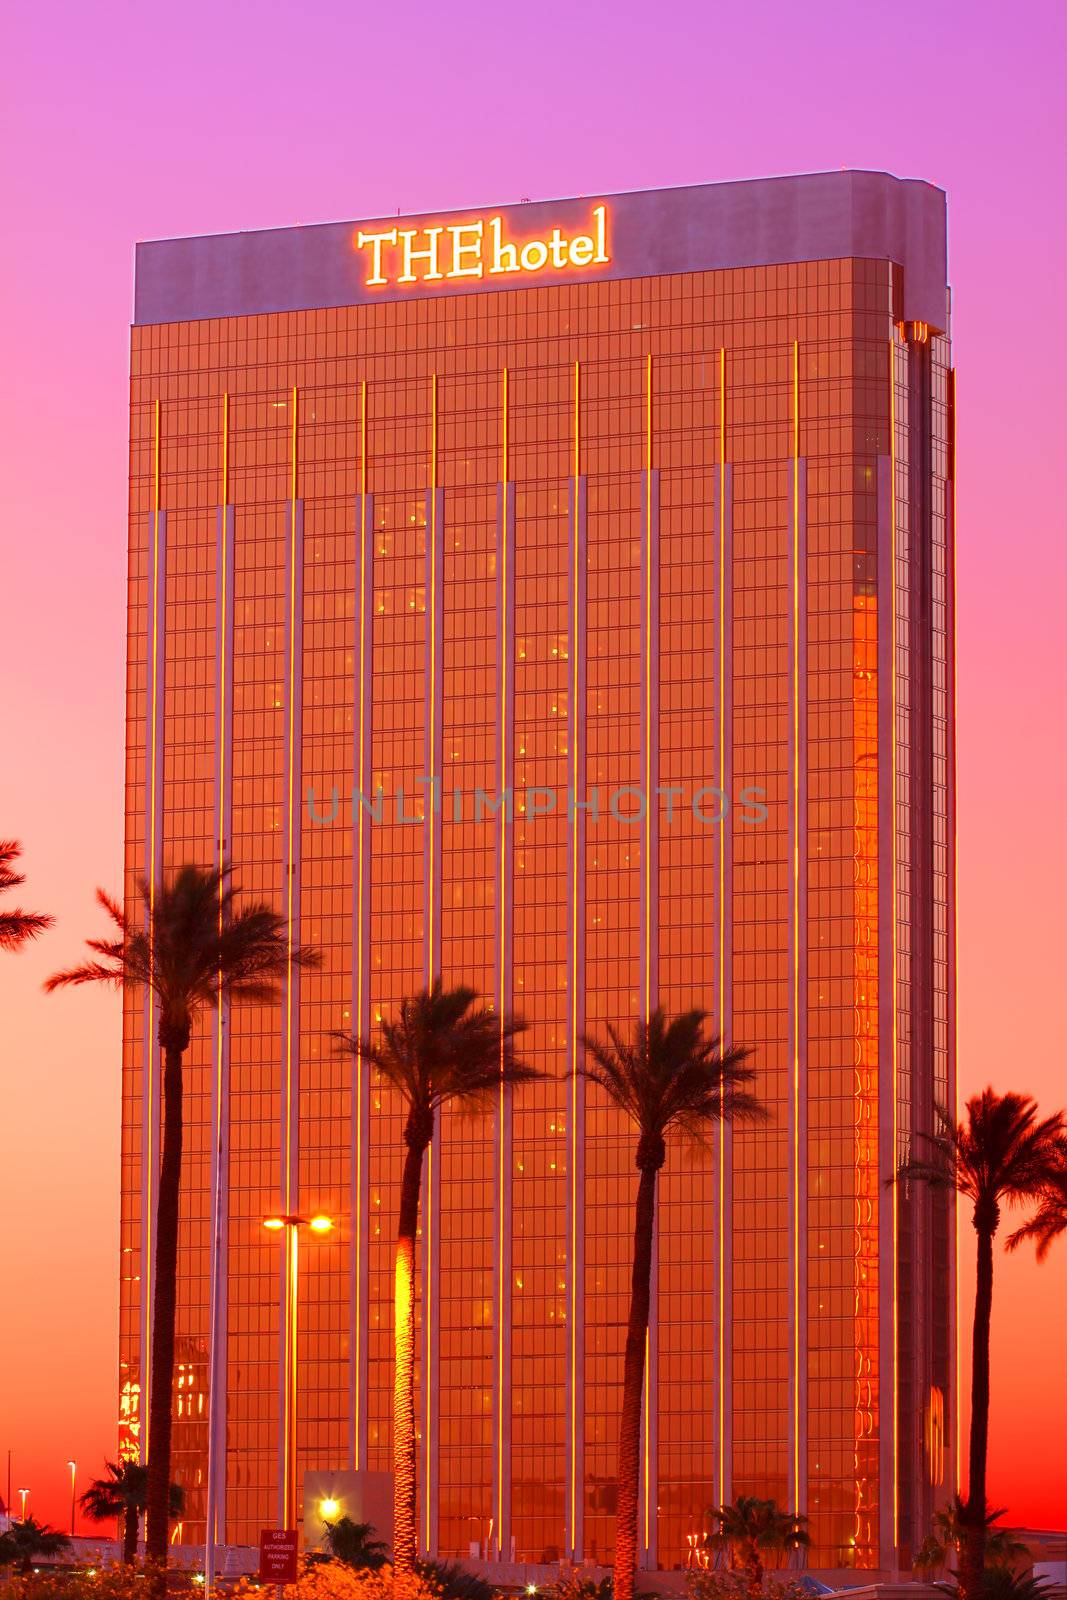 Las Vegas, USA - May 23, 2012: THEhotel at Mandalay Bay in Las Vegas, Nevada.  THEhotel was opened in 2003 and is 43 stories high.